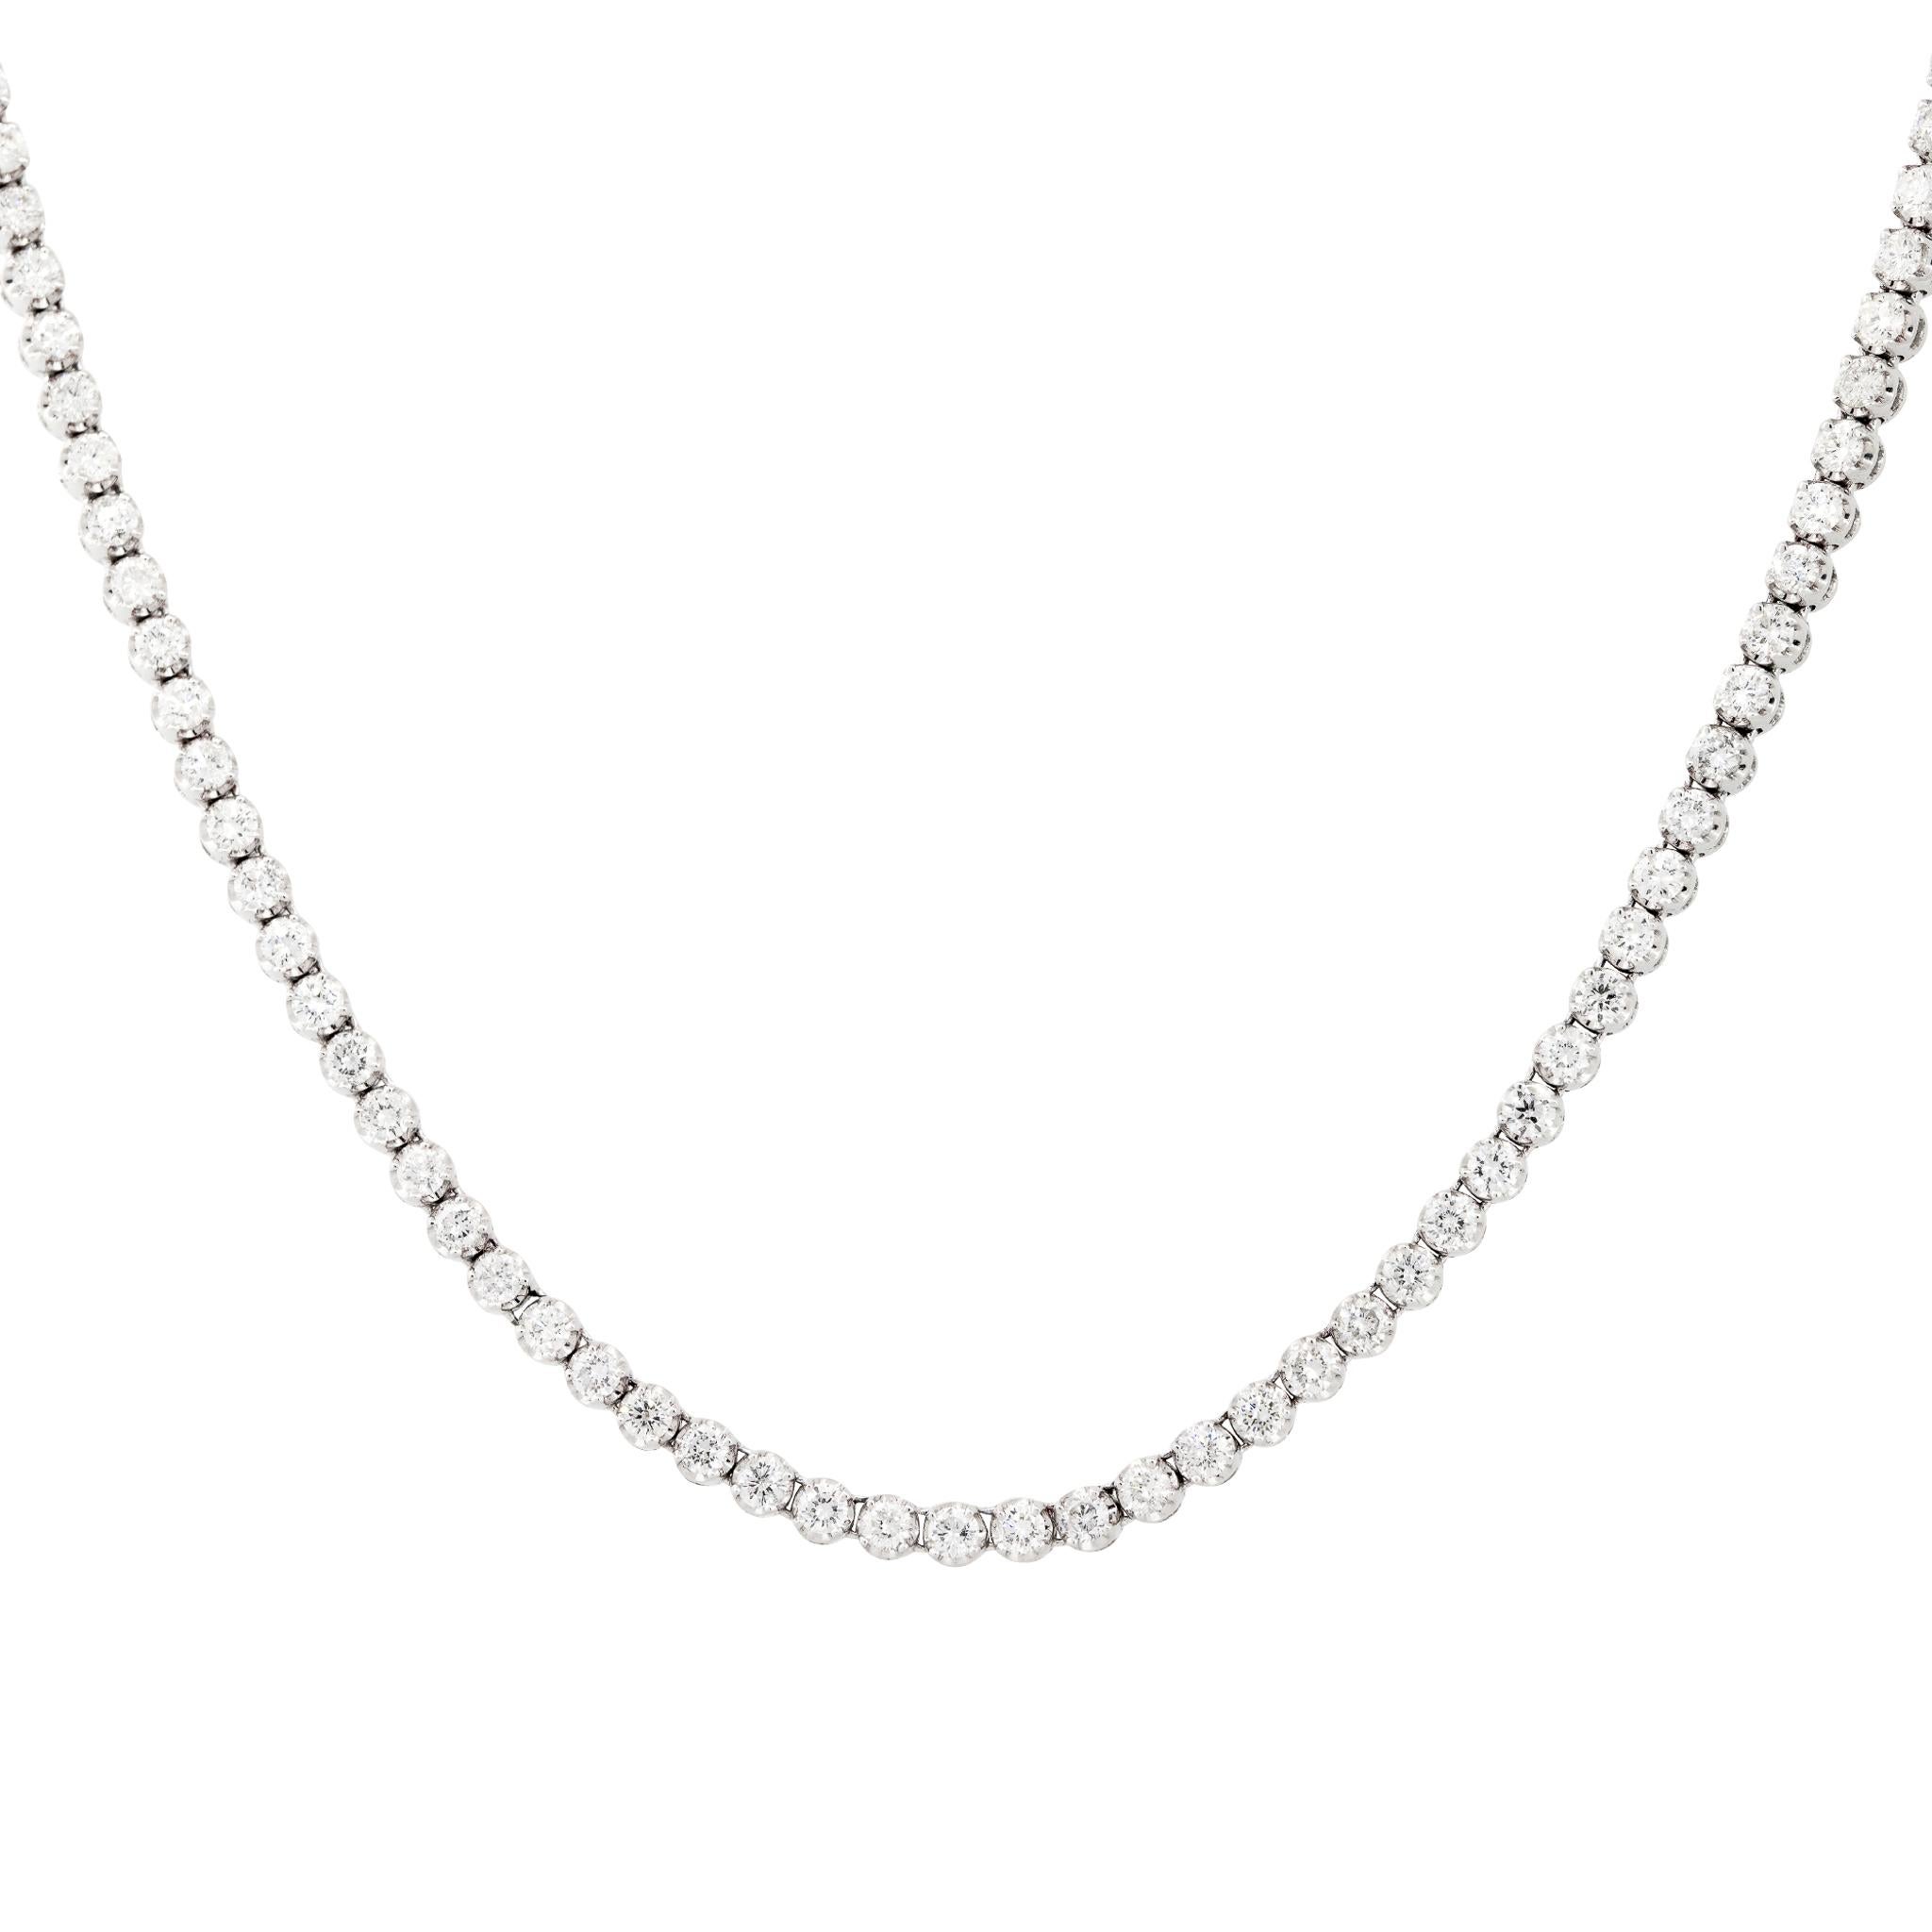 14k White Gold 8.14ctw Diamond Tennis Necklace

Material: 14k White Gold
Diamond Details: Approximately 8.14ctw of Round Brilliant Diamonds
Total Weight: 24.8g (16.0dwt) 
Chain Length: 18